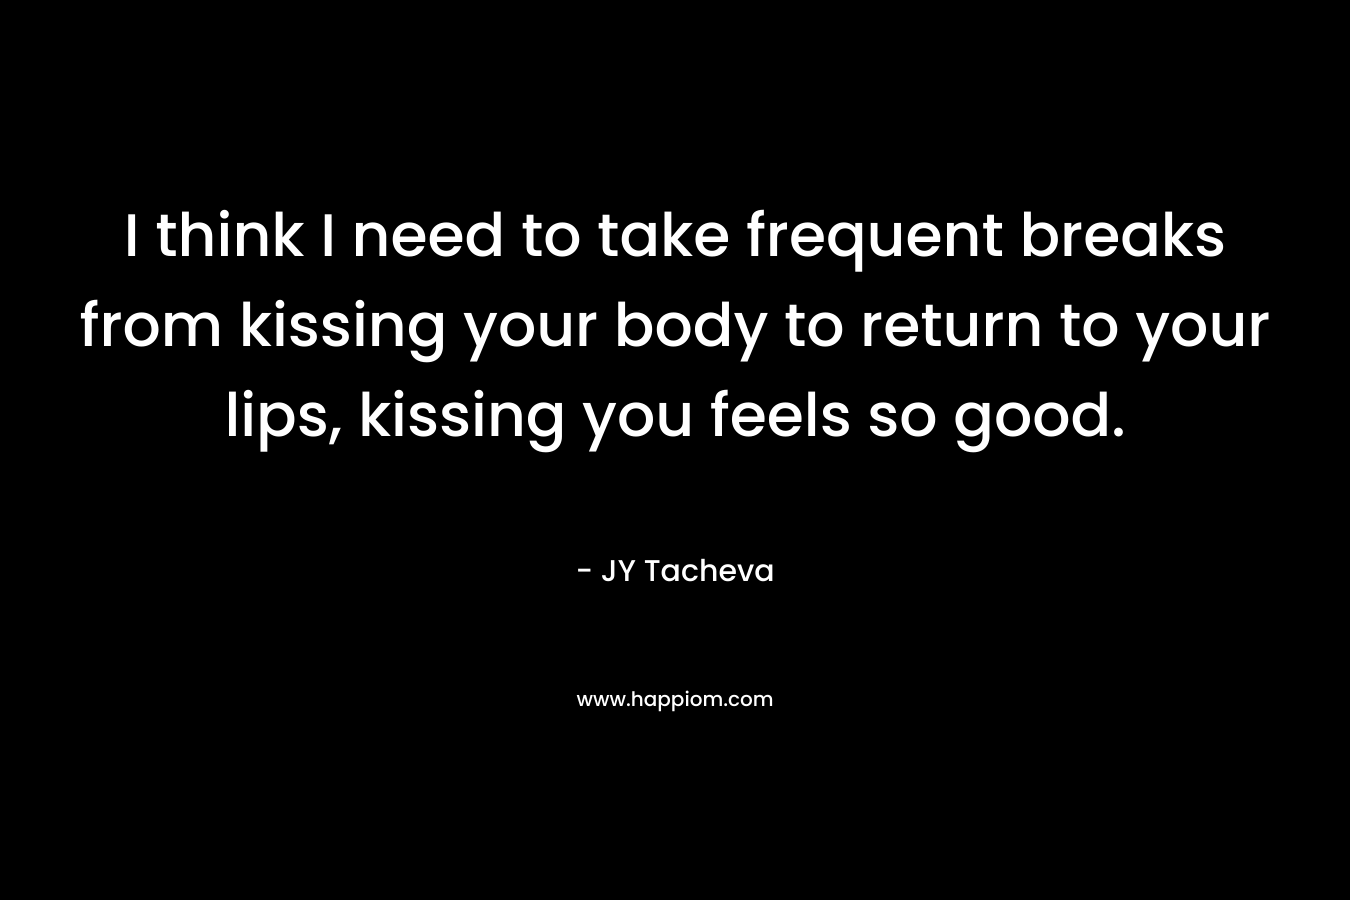 I think I need to take frequent breaks from kissing your body to return to your lips, kissing you feels so good.